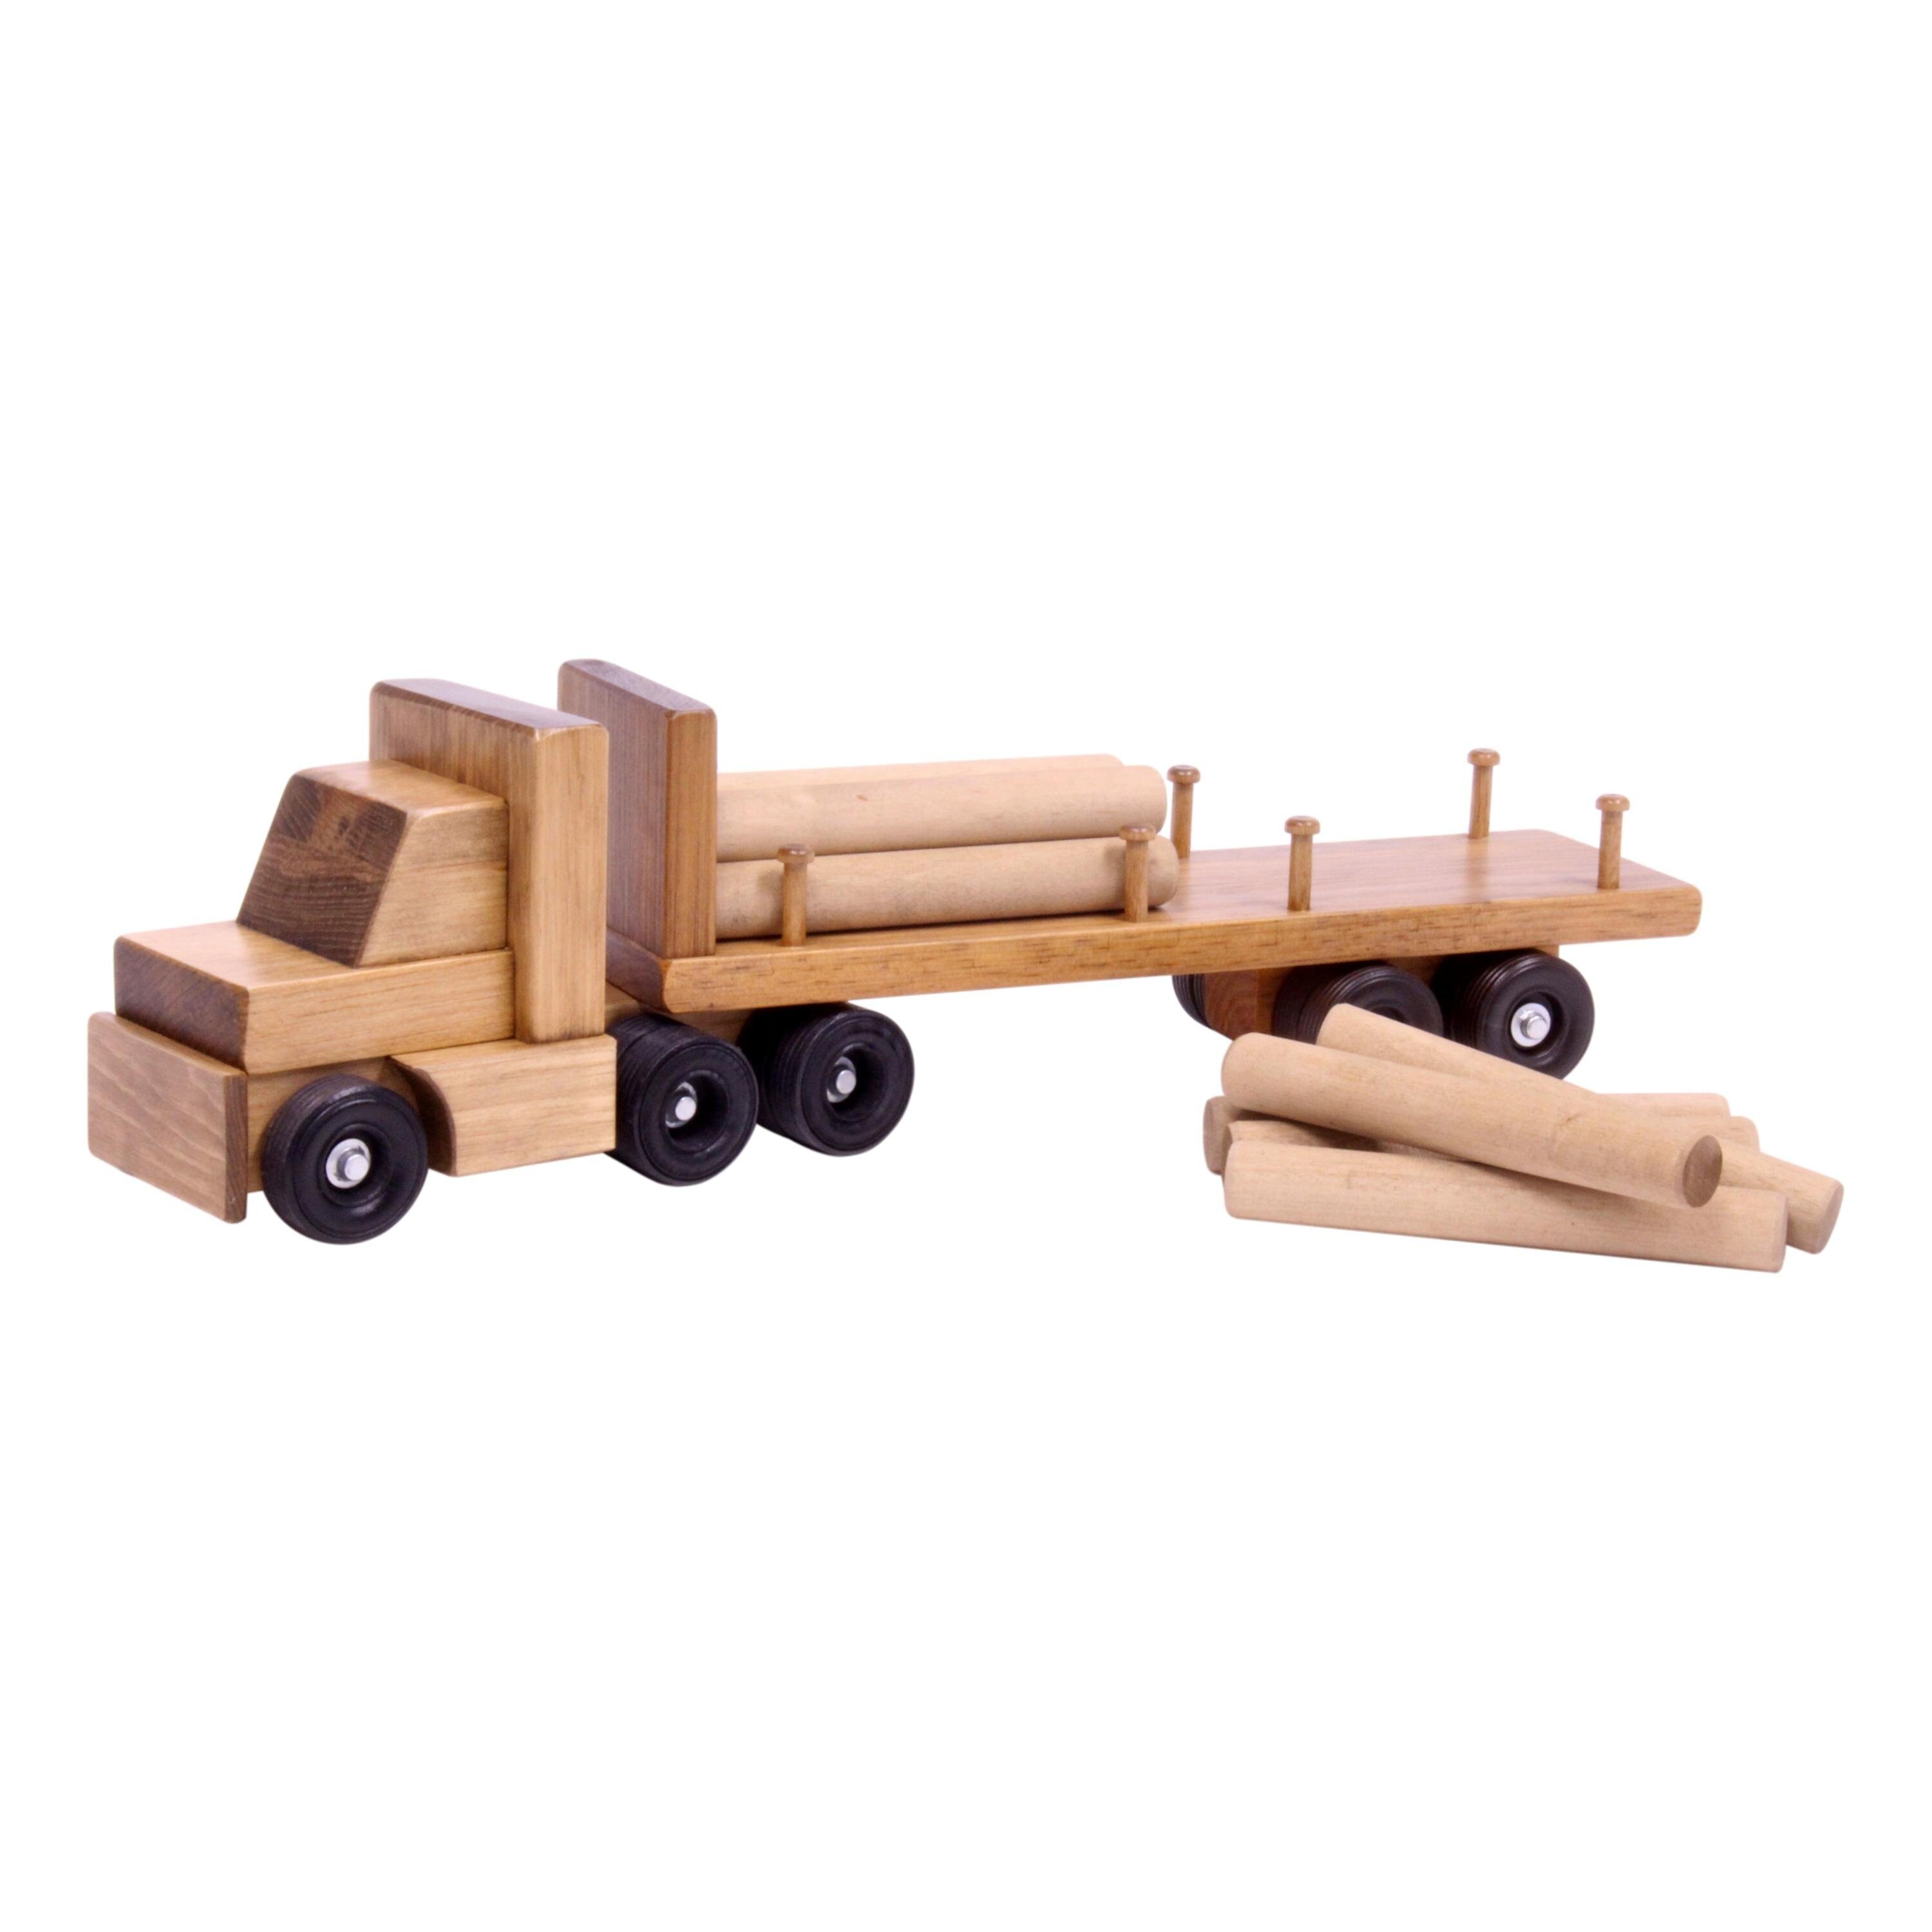 AmishToyBox.com Log Truck Wooden Toy - Amish-Made in Lancaster County,  Pennsylvania - with 6 Removable Logs